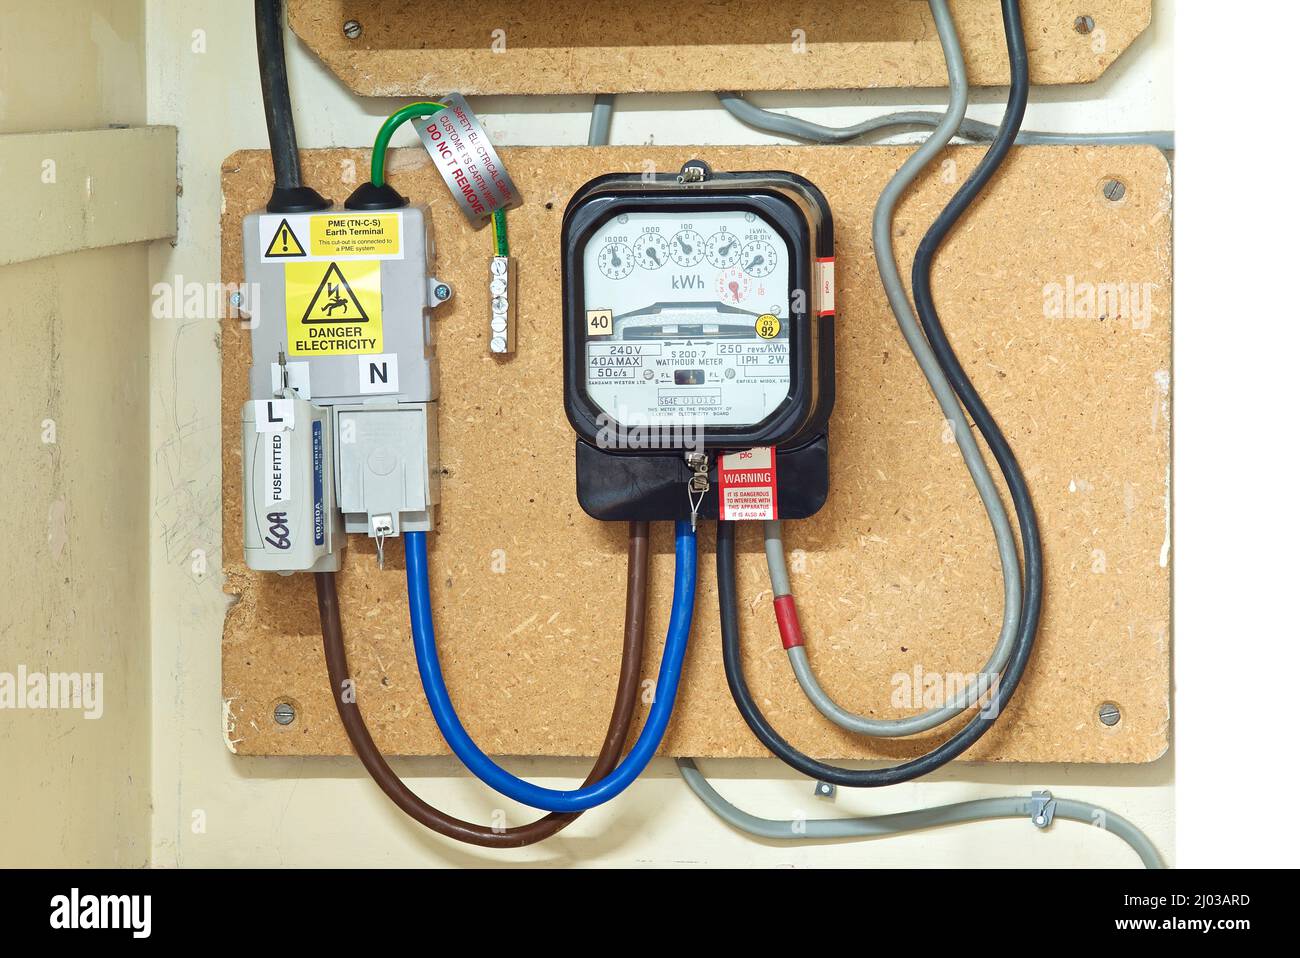 Domestic consumer electrical supply connected to PME system and analogue electric meter indicating how much electric / energy has been consumed. Stock Photo